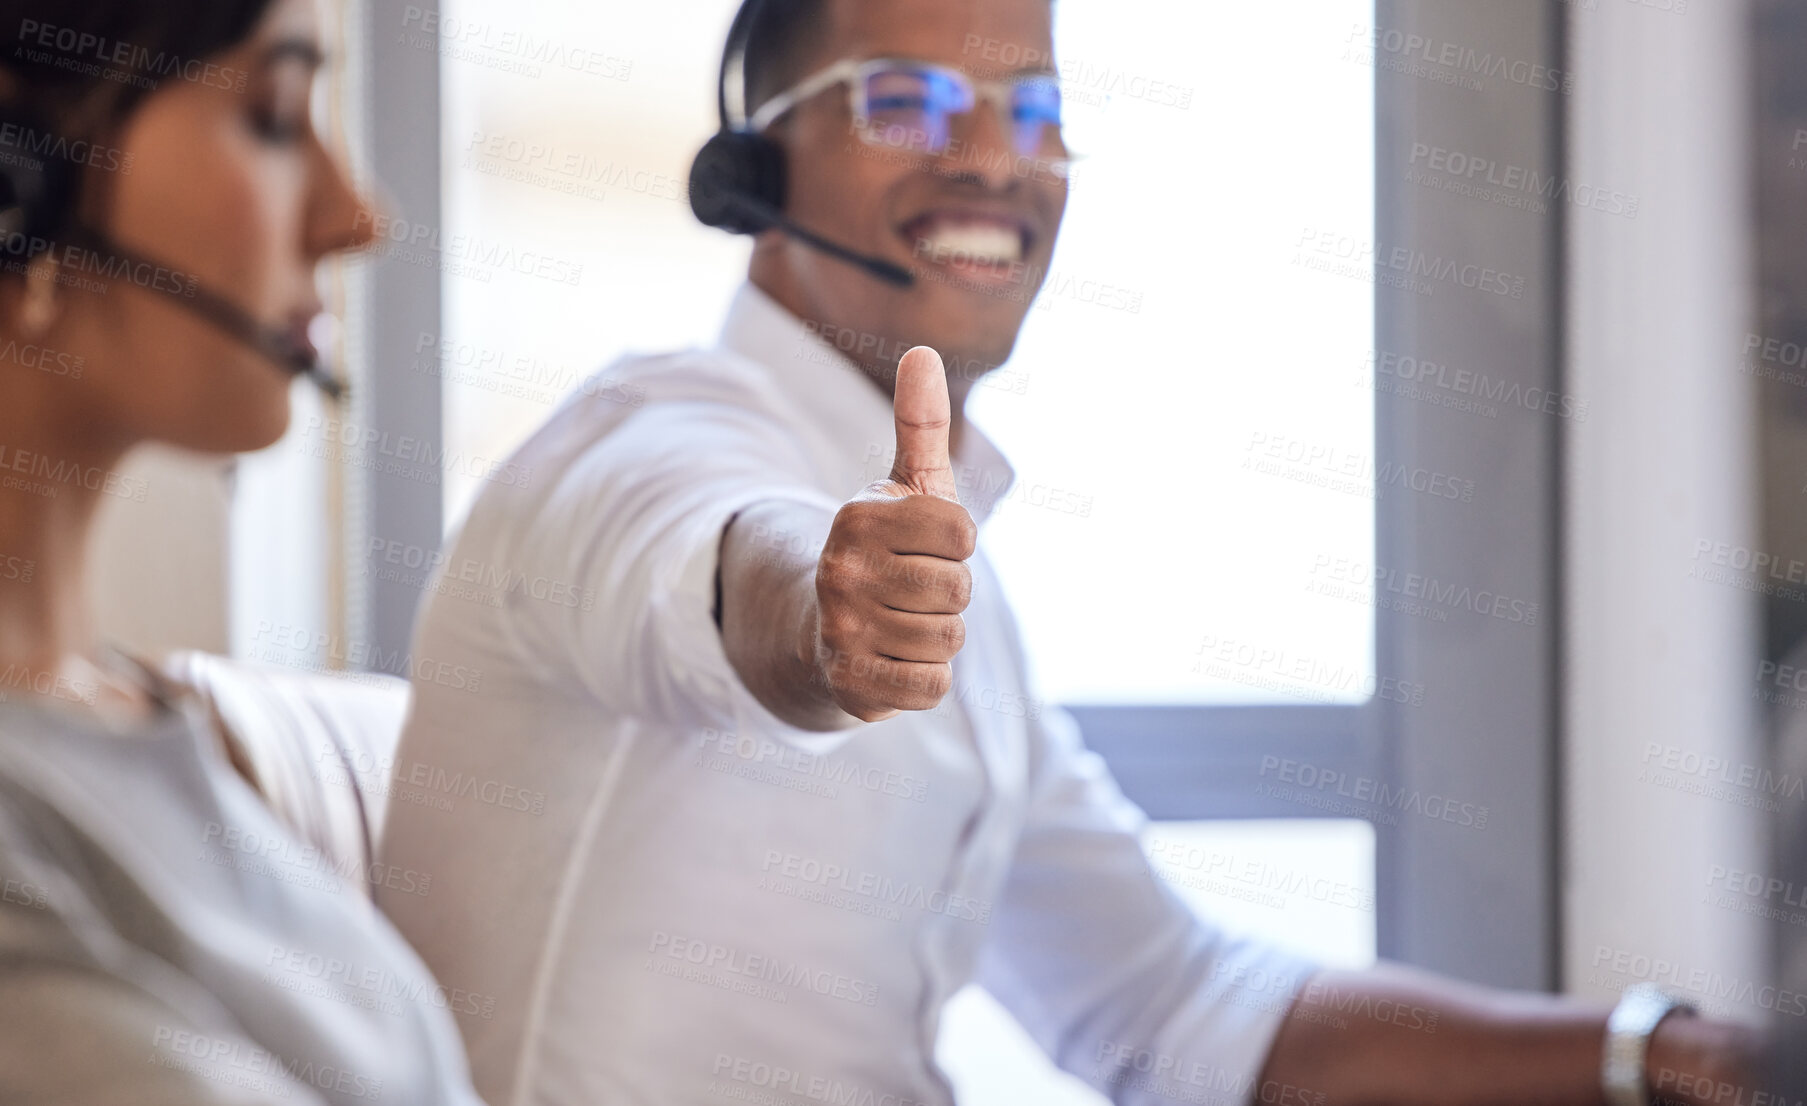 Buy stock photo Closeup shot of a call centre agent showing thumbs up while working in an office